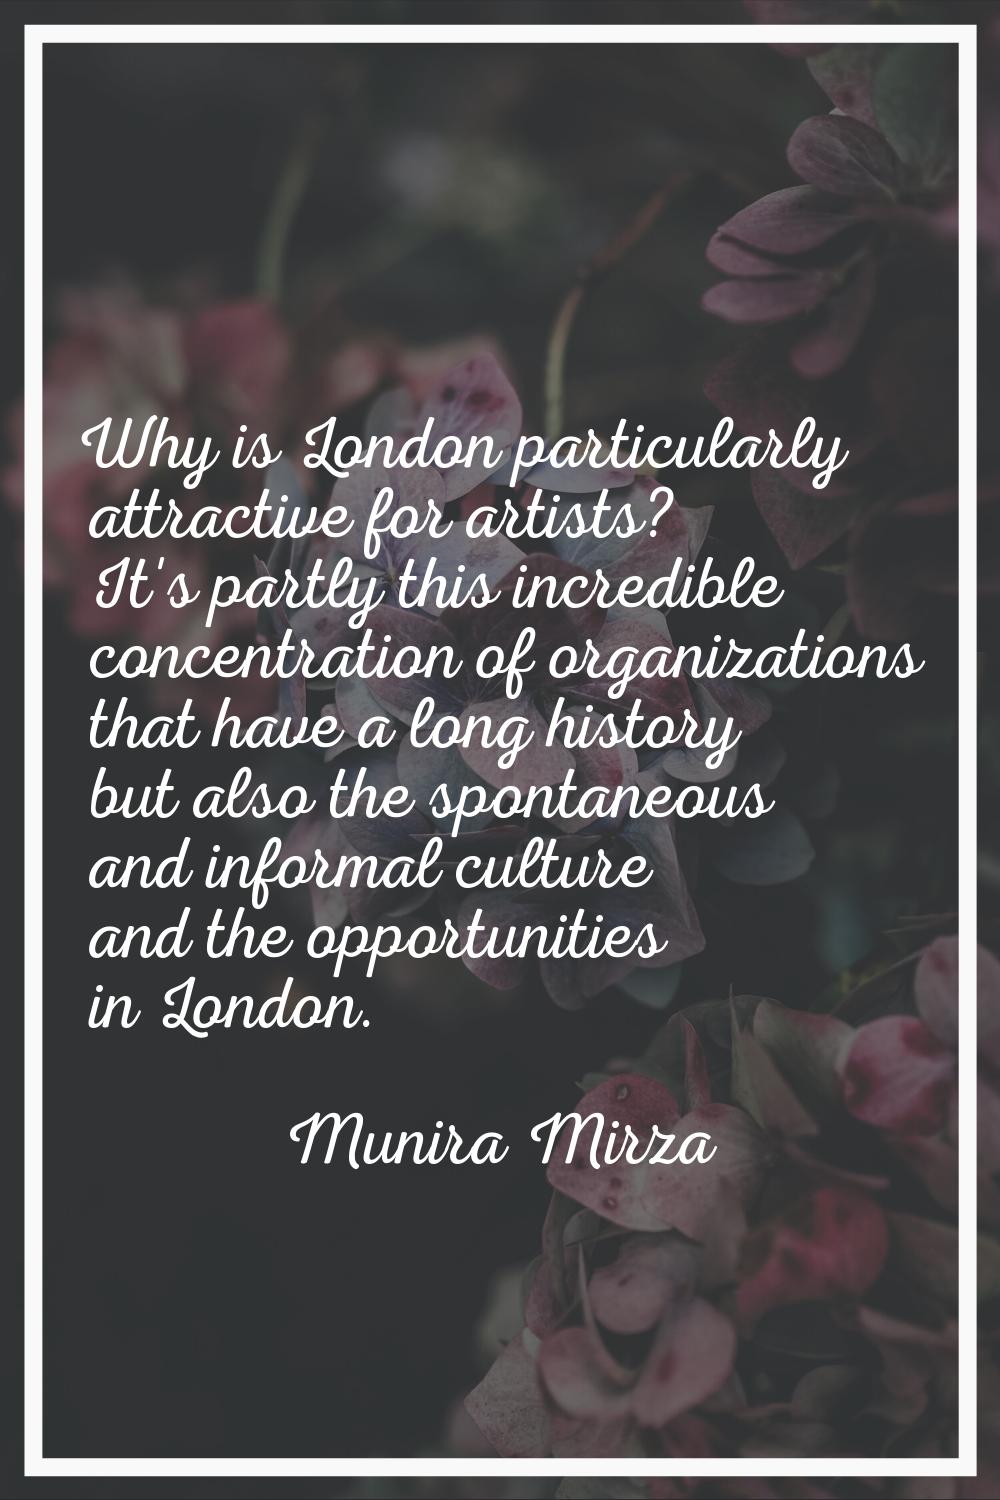 Why is London particularly attractive for artists? It's partly this incredible concentration of org